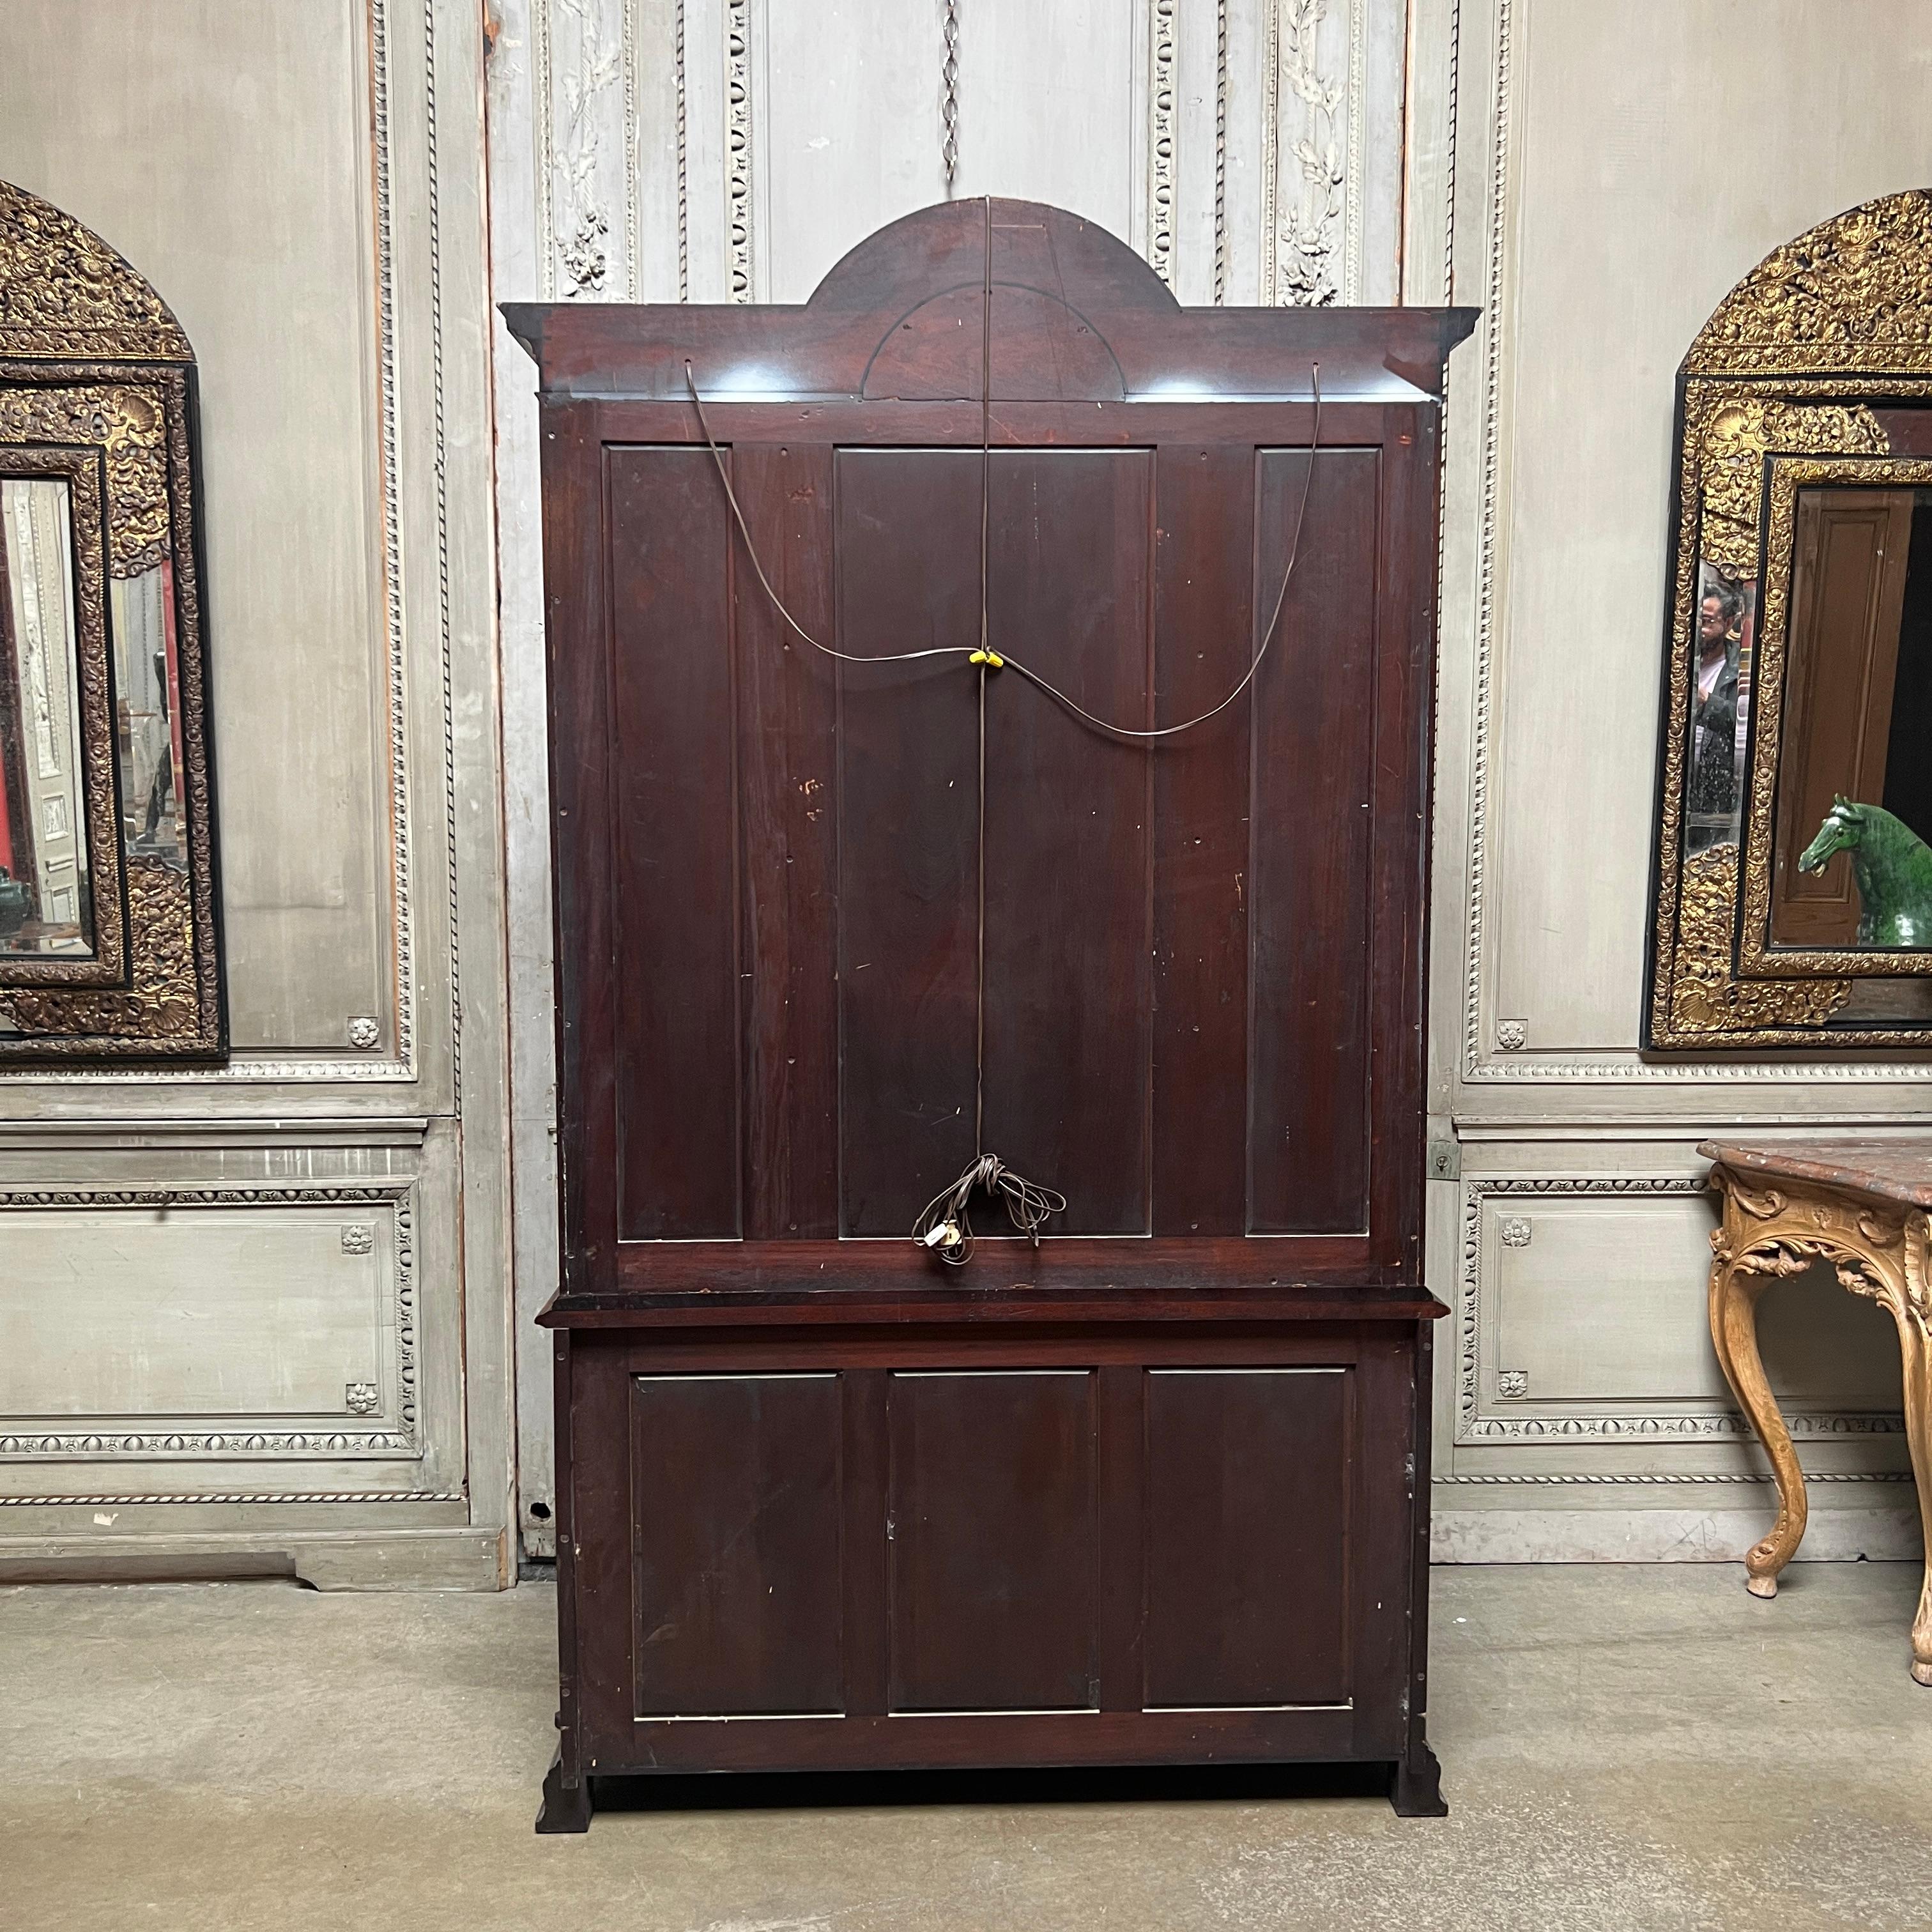 A fine quality American made George II style bookcase, breakfront, china cabinet in mahongay with inayed boxwood. This piece has a glass upper section with glass shelves and an arched top, It is nicely detailed throughout and is a wonderful smaller